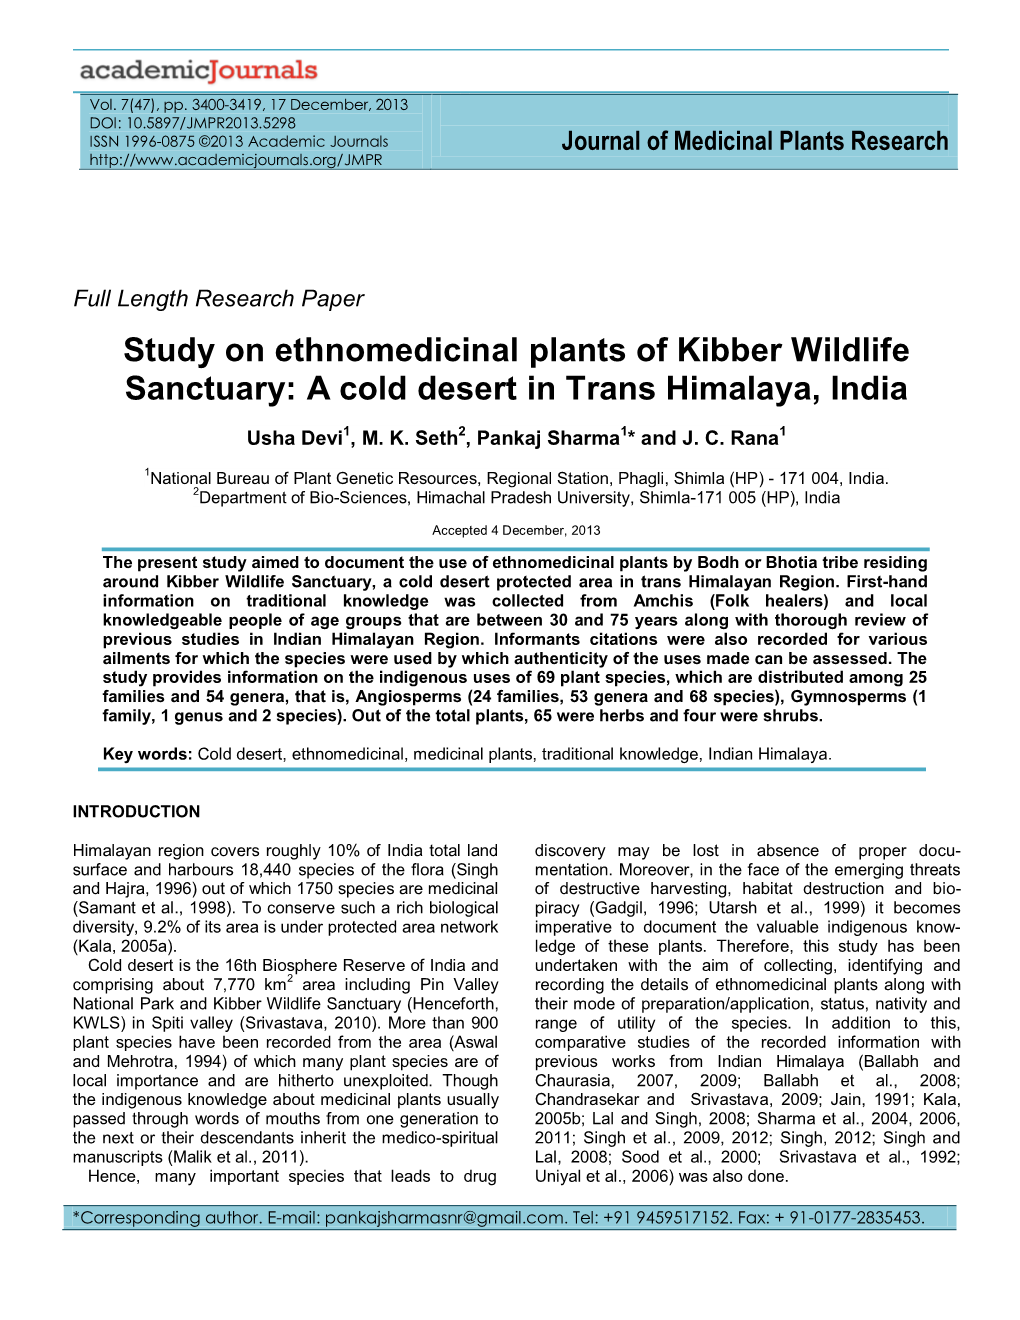 Study on Ethnomedicinal Plants of Kibber Wildlife Sanctuary: a Cold Desert in Trans Himalaya, India